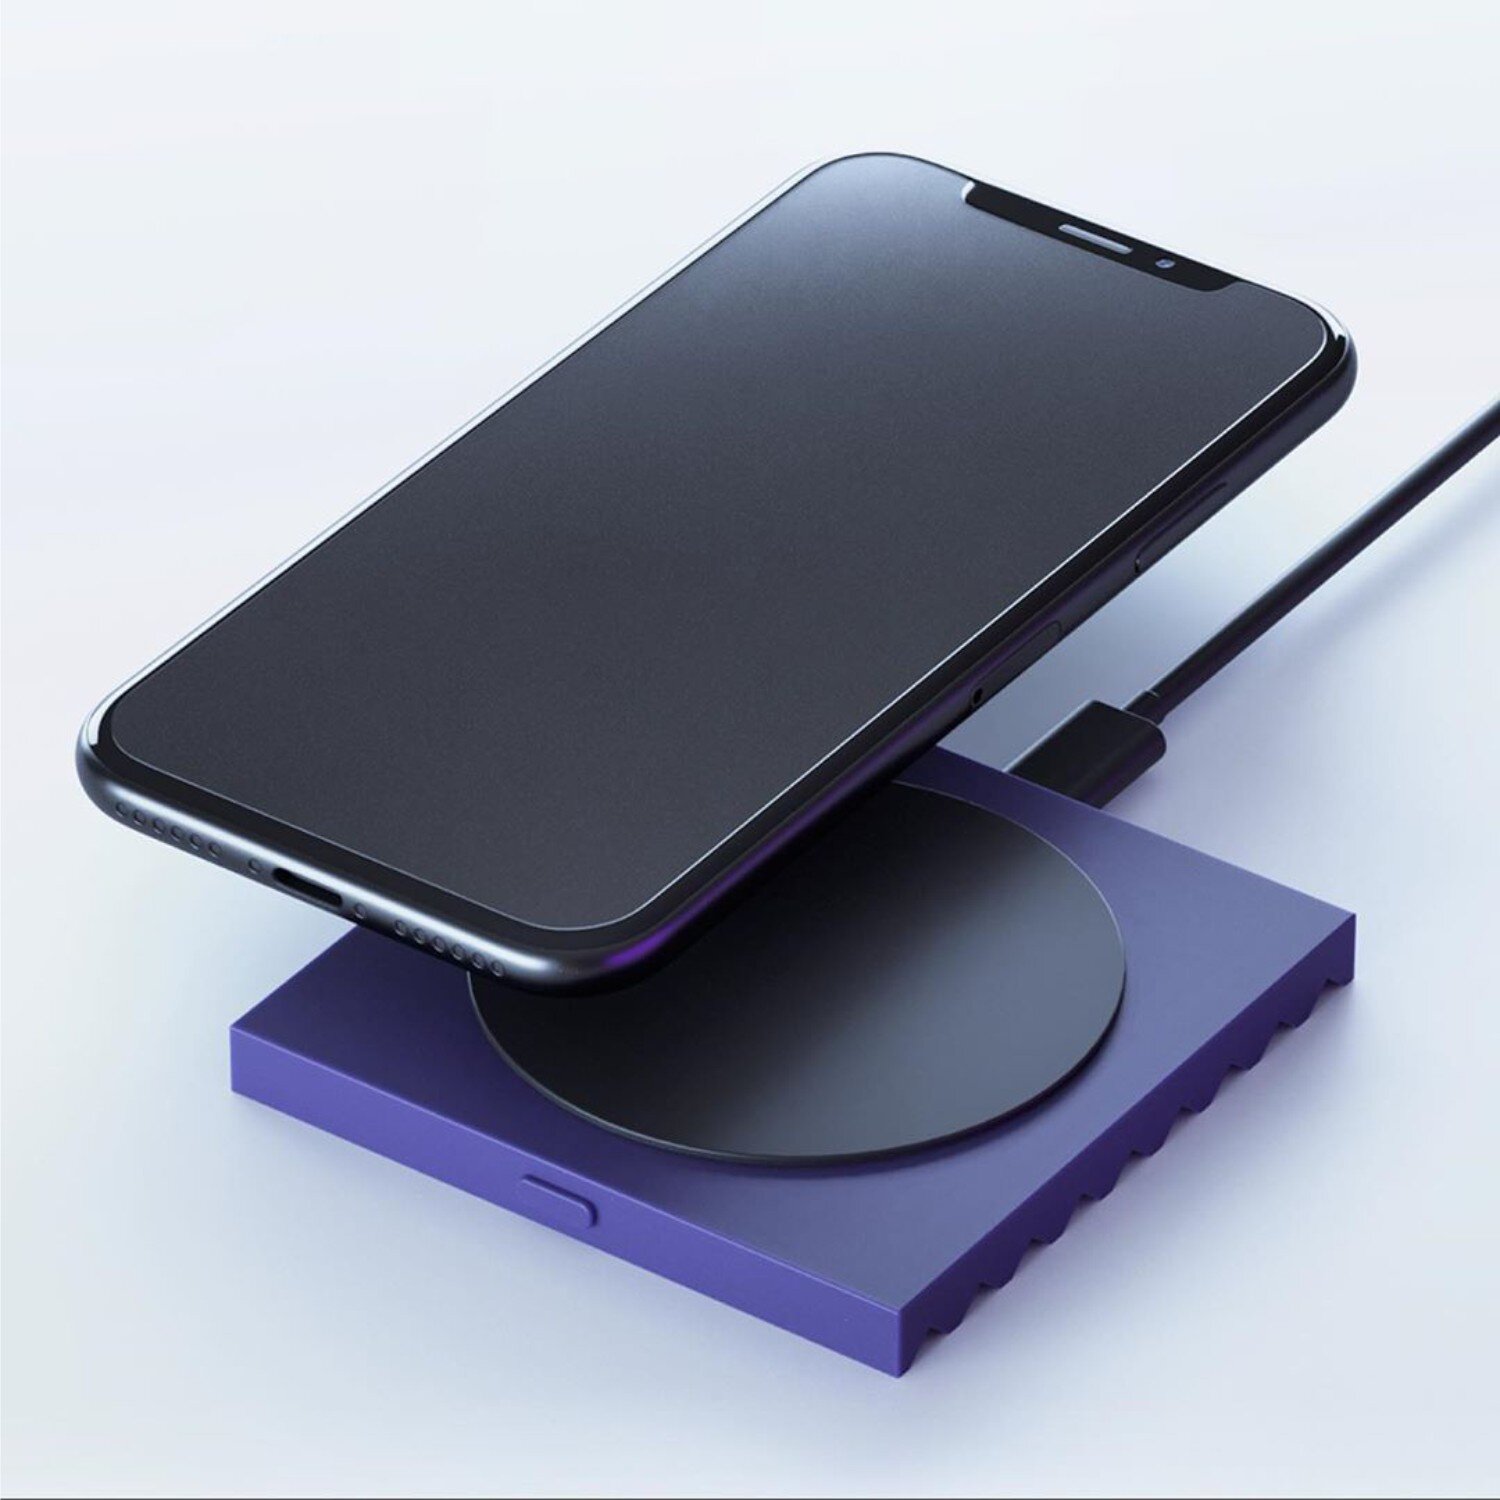 Plum Delivers The Wireless Smartphone Charger